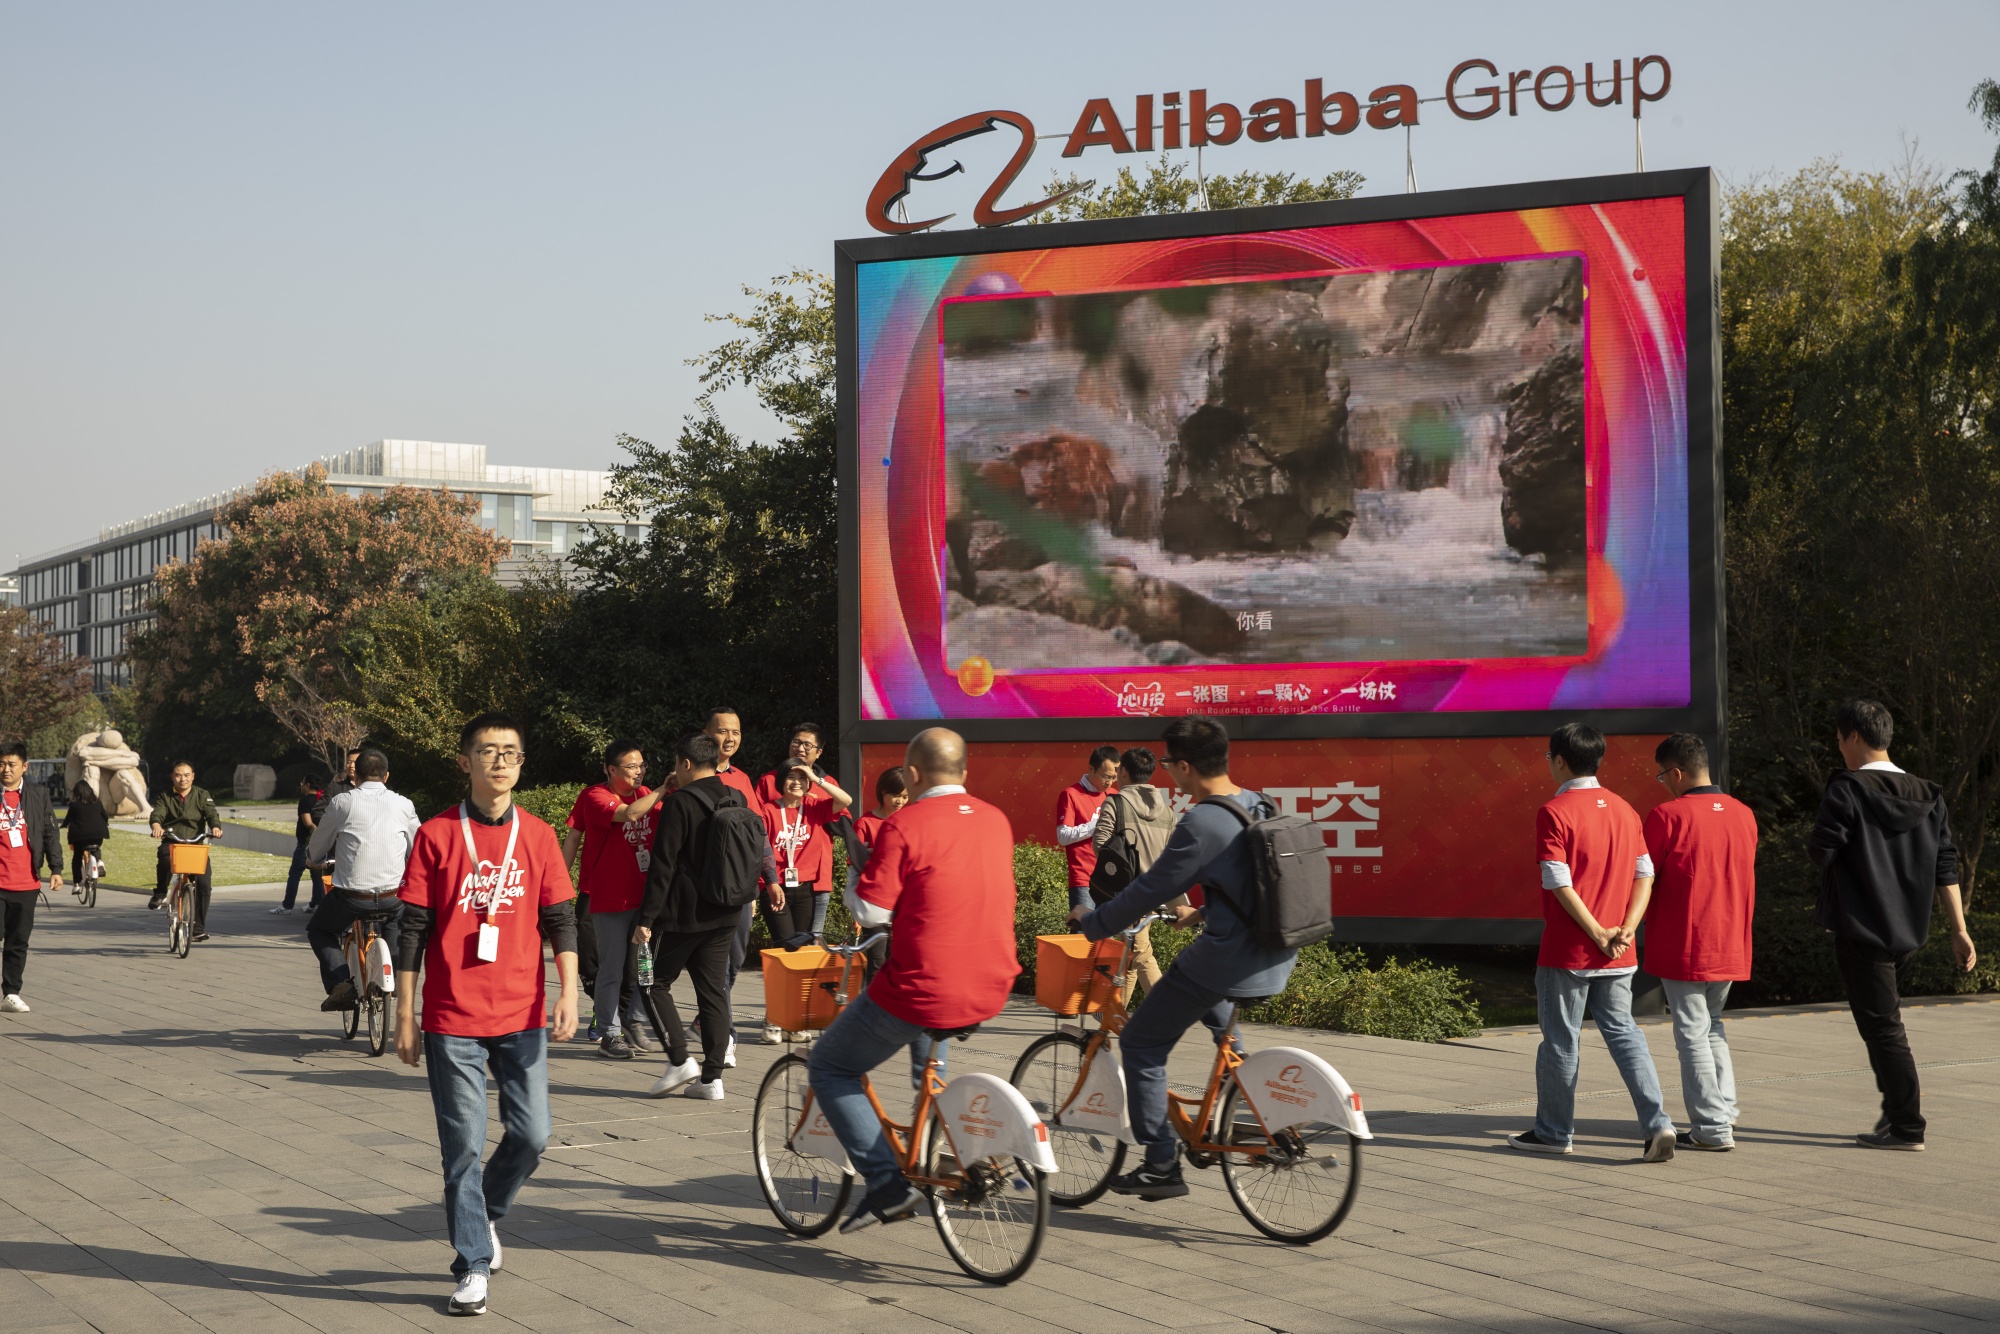 Alibaba executives are framing the virus outbreak as a one-off event.